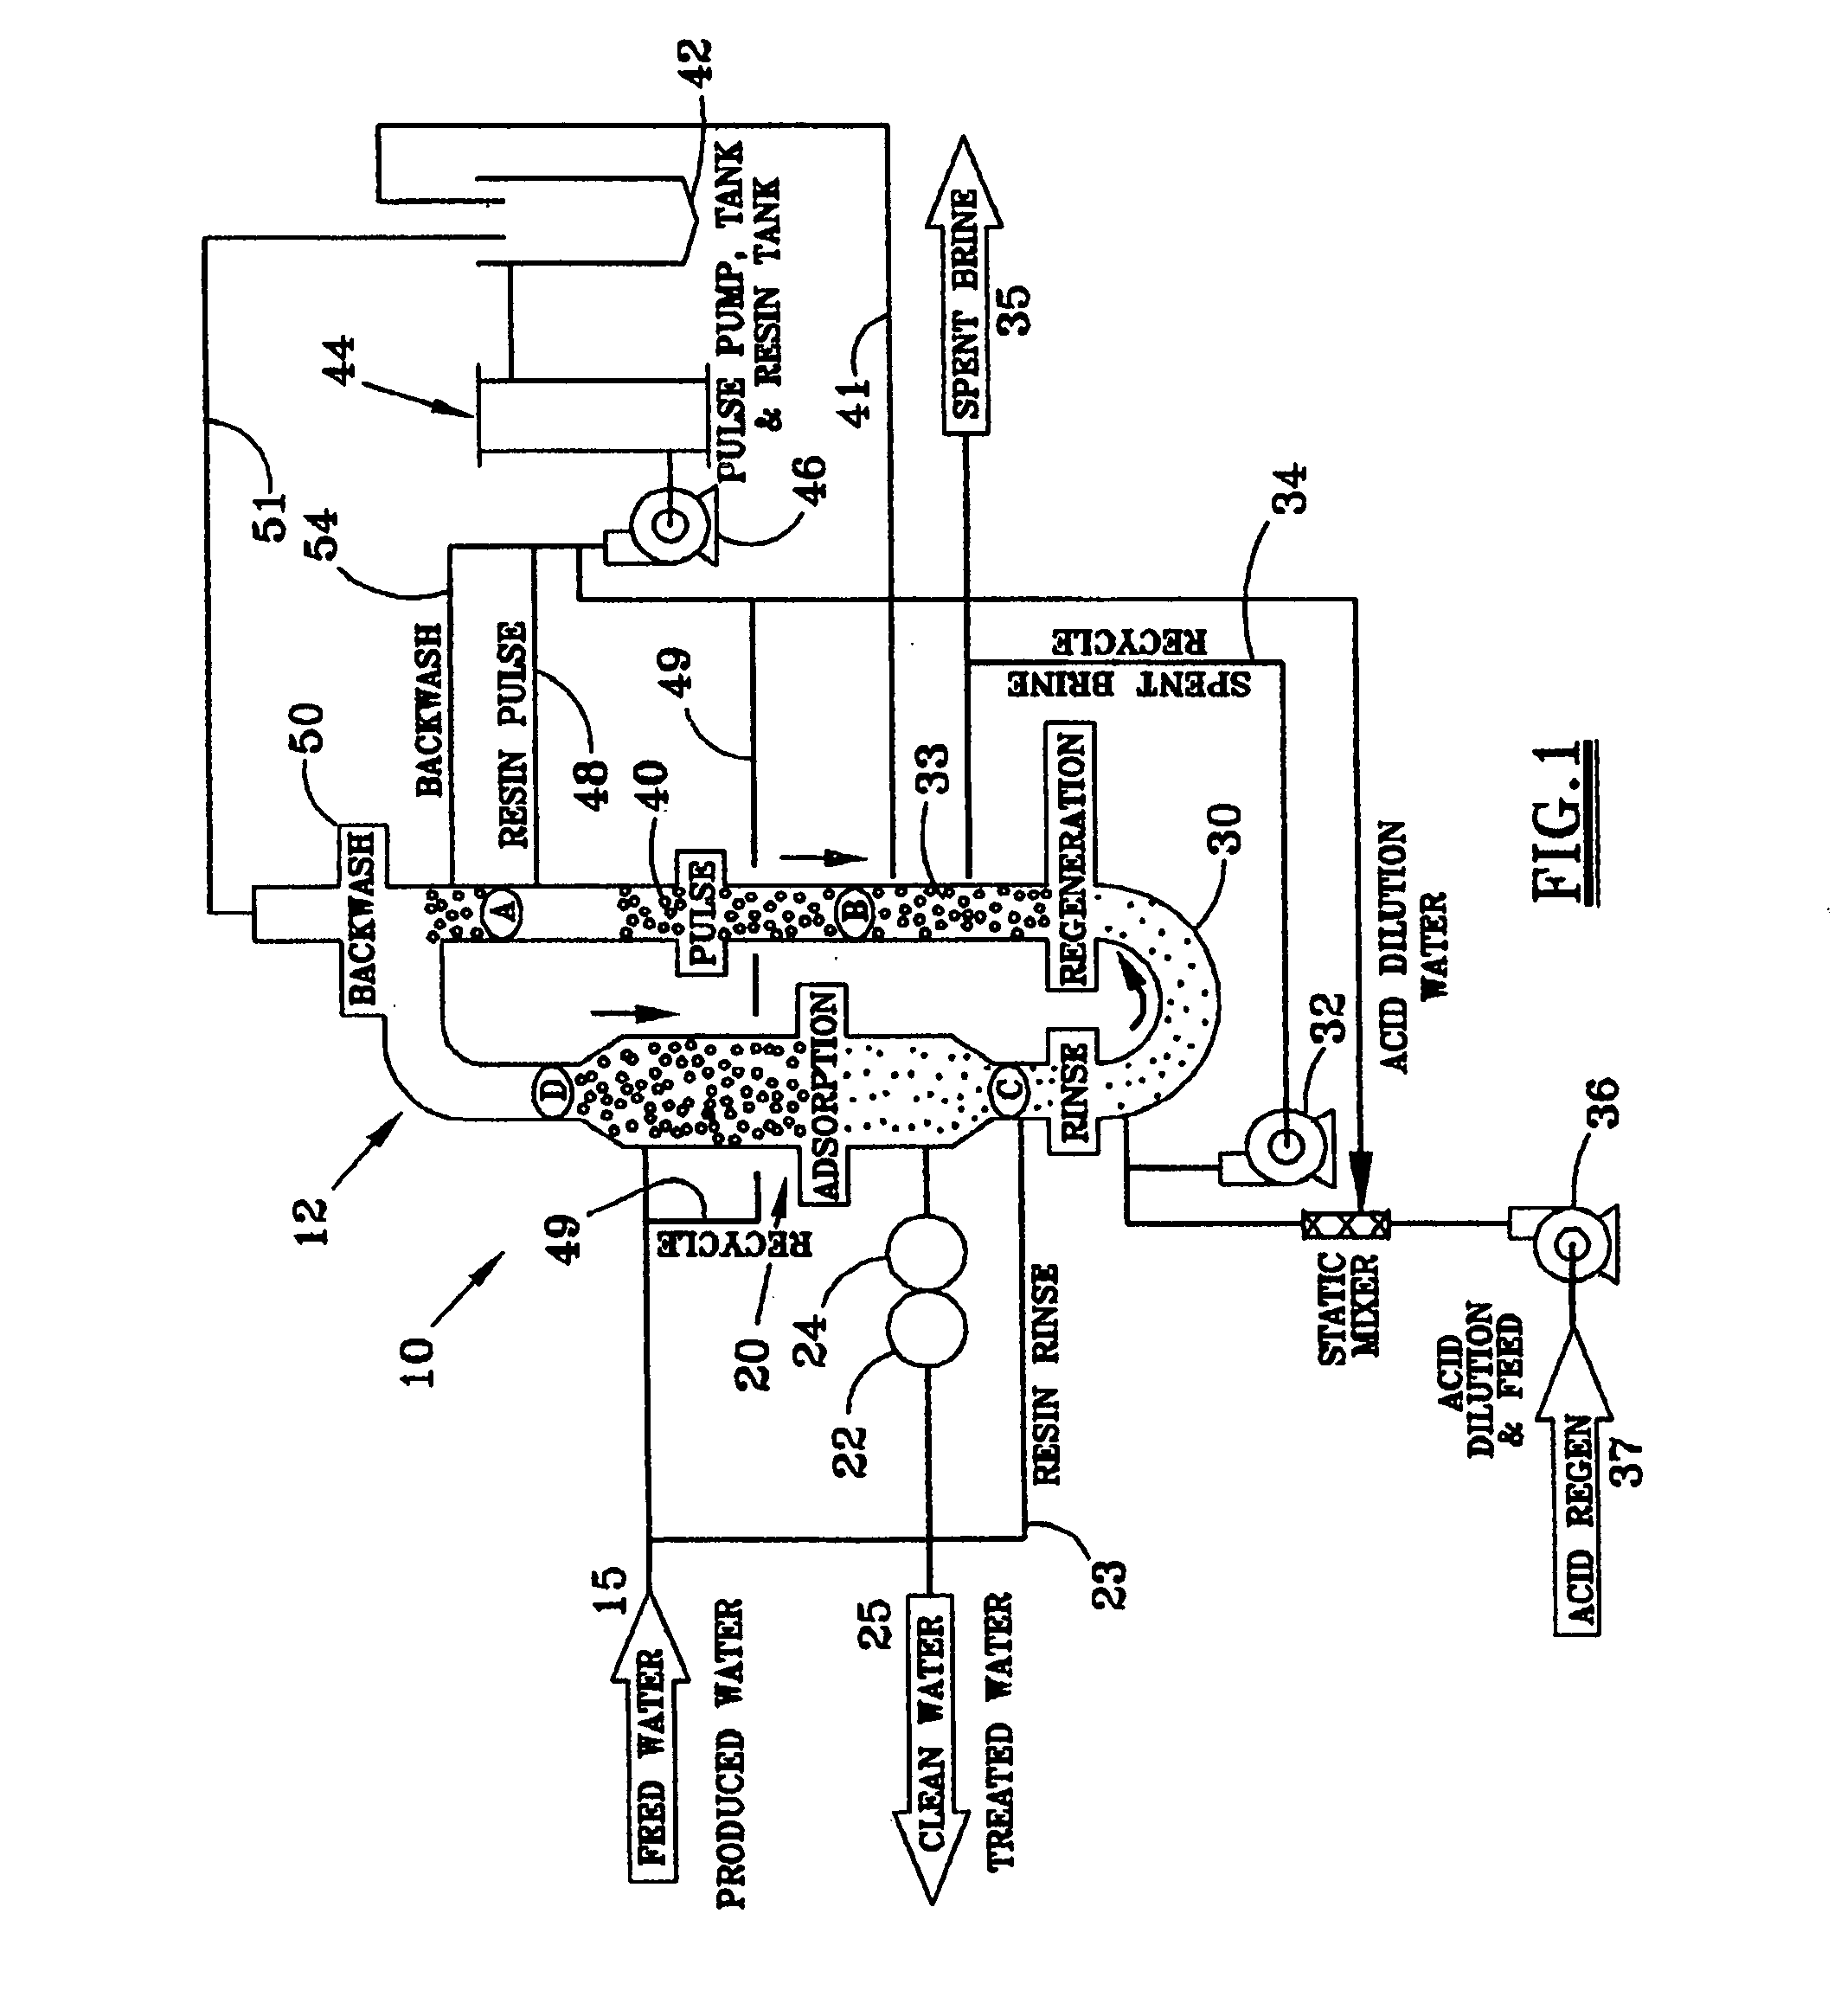 Process for continuous ion exchange